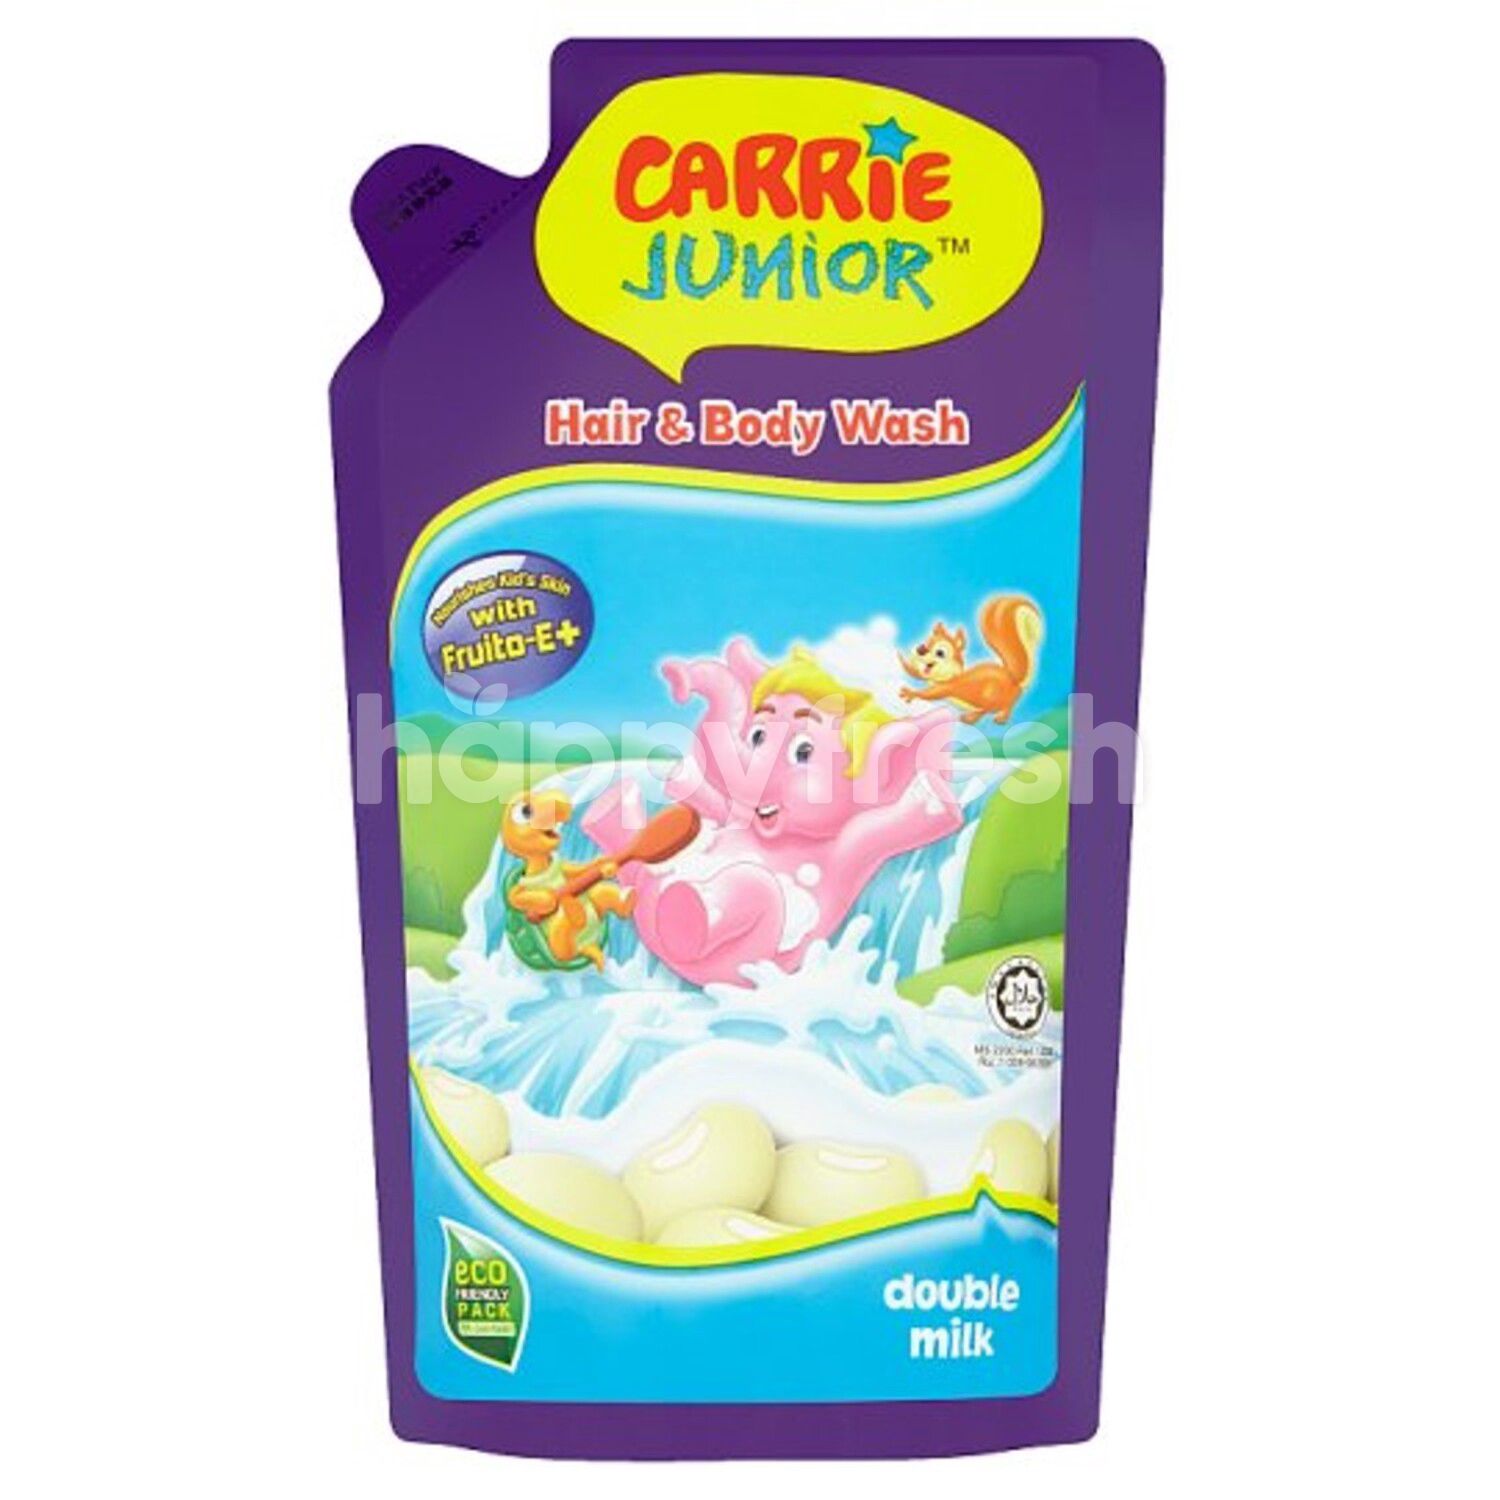 Body carrie and wash hair junior baby hair